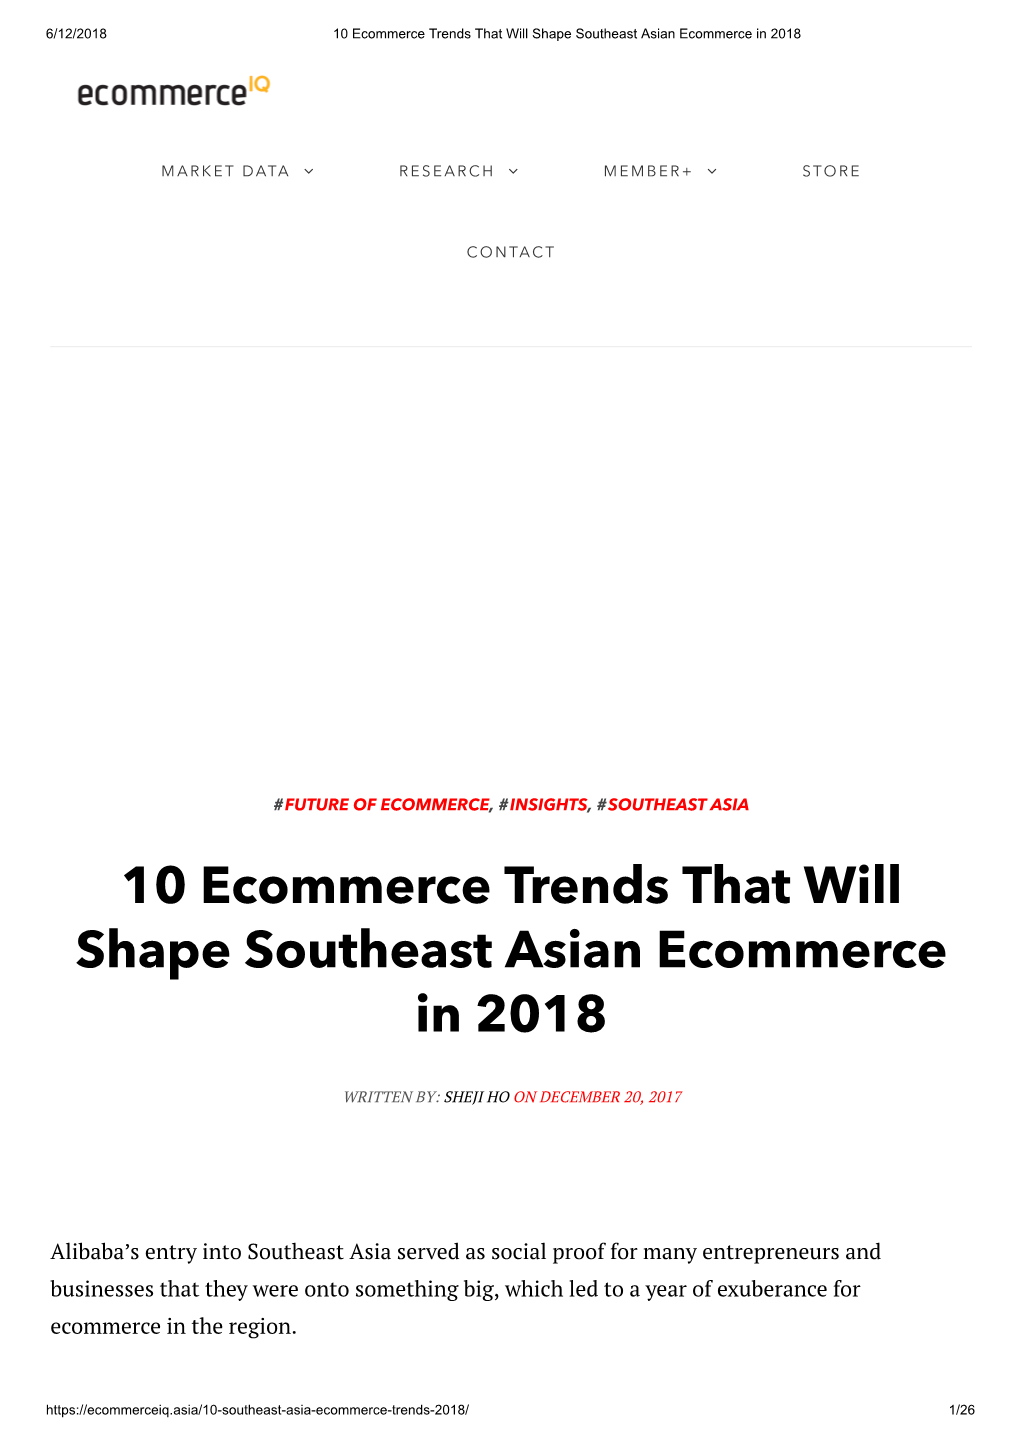 10 Ecommerce Trends That Will Shape Southeast Asian Ecommerce in 2018